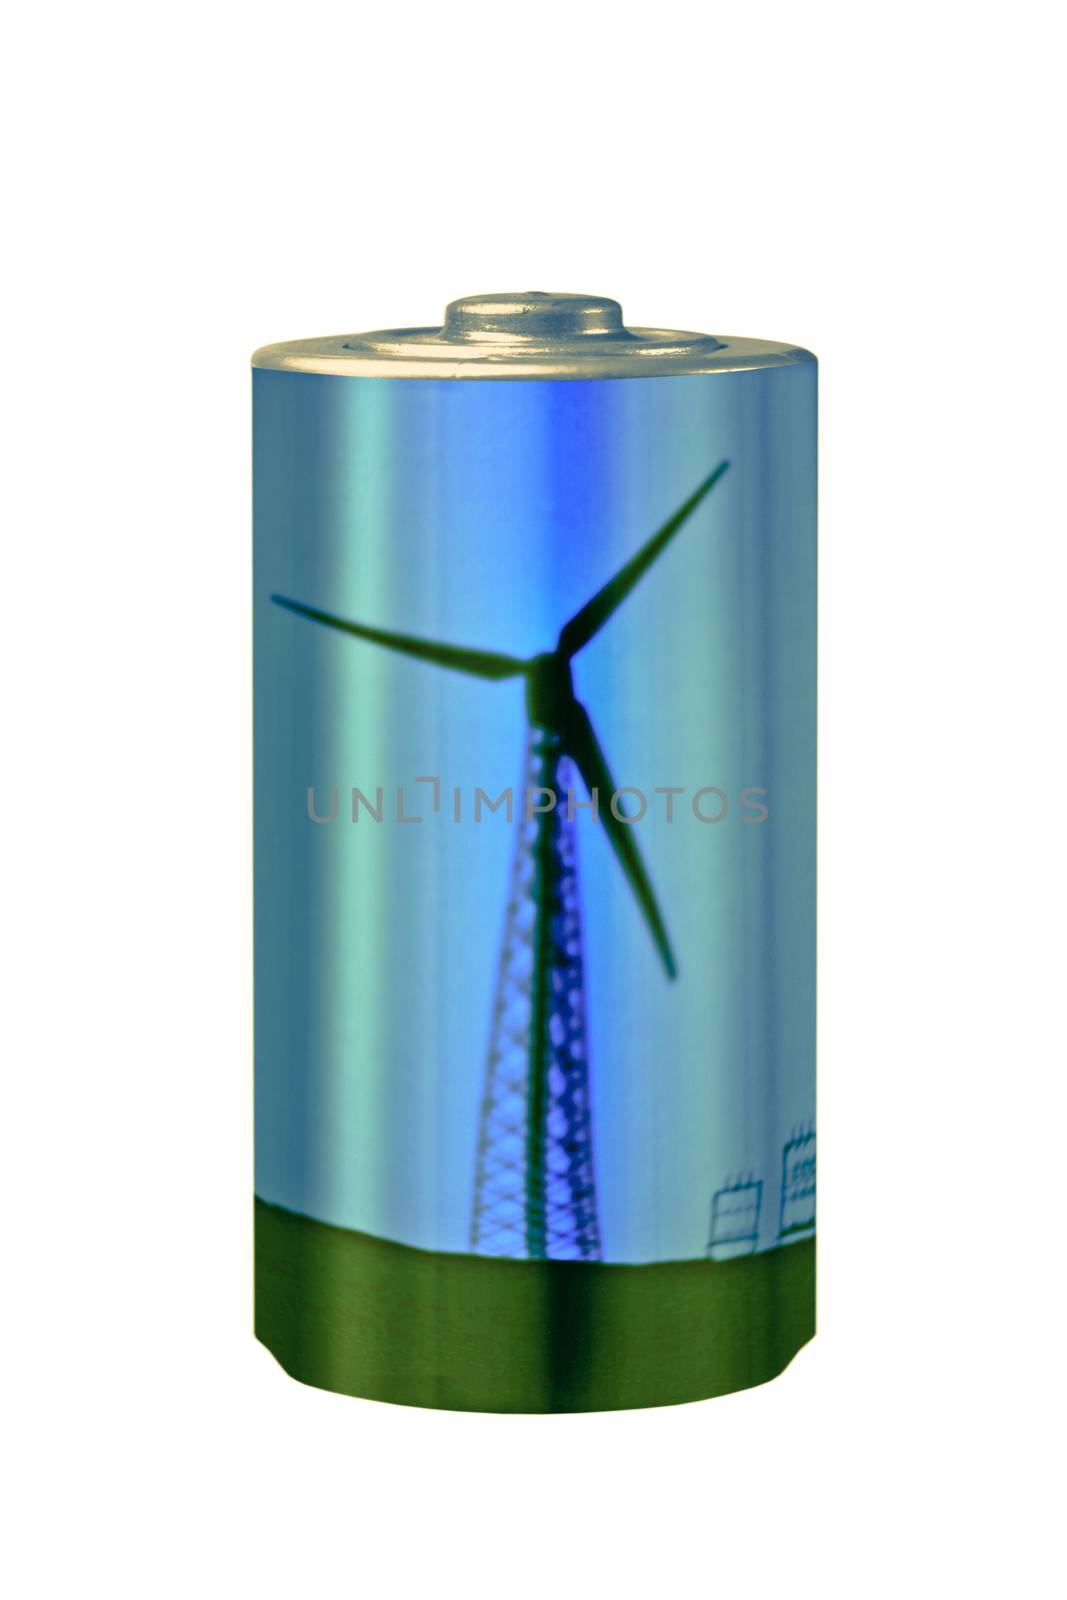 Save Naural energy Concept, Wind energy, Windmill